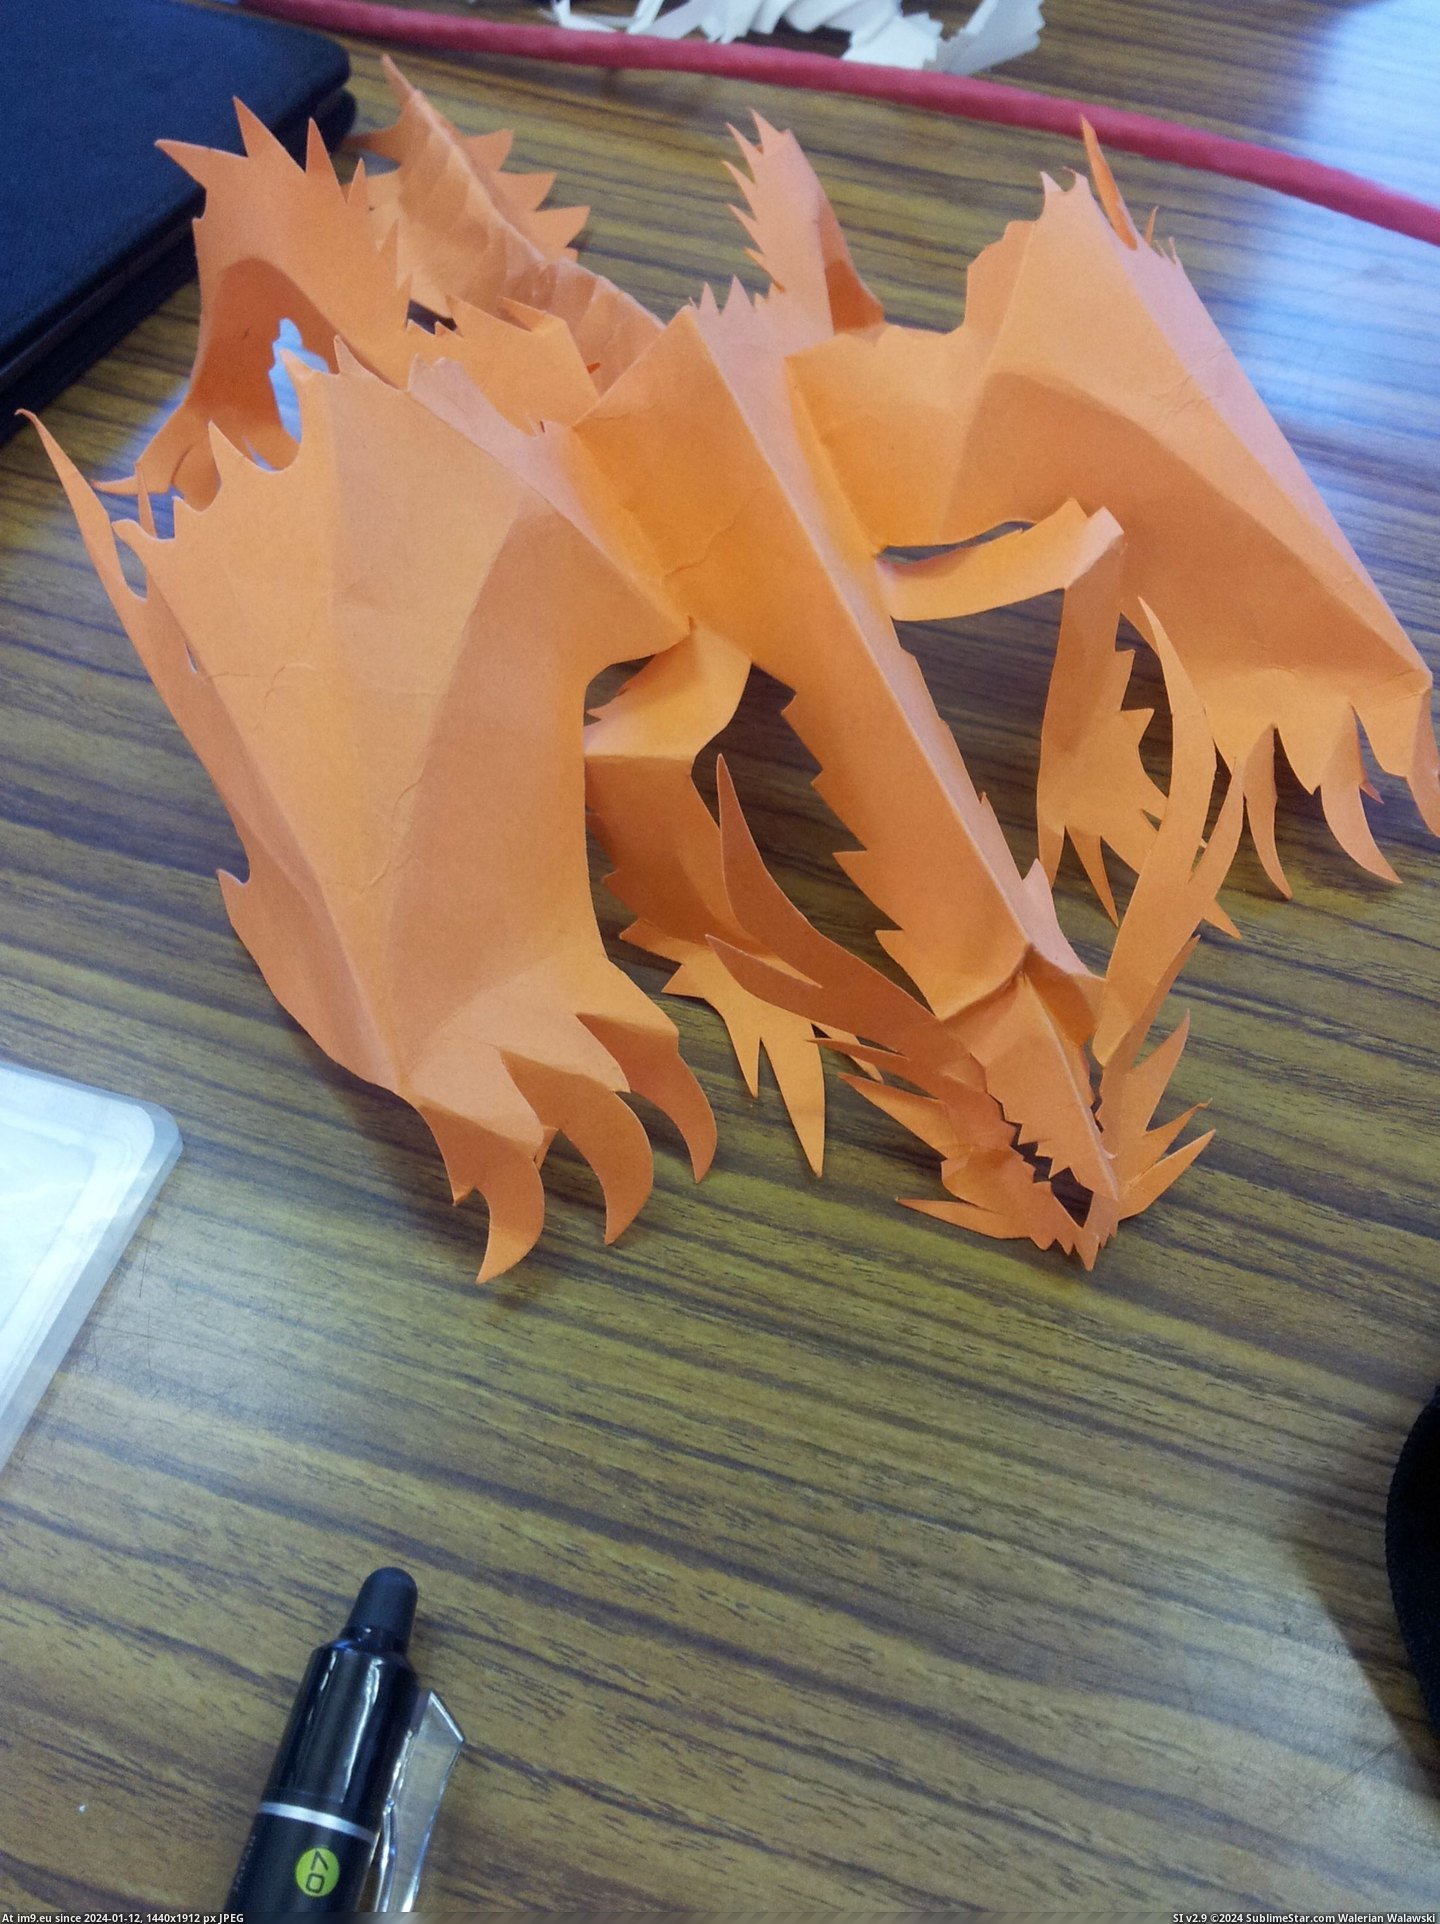 #One #Paper #Students #Creatures #Freehand #Bored #Completely [Pics] One of my students makes these creatures out of paper completely freehand whenever he is bored 10 Pic. (Bild von album My r/PICS favs))